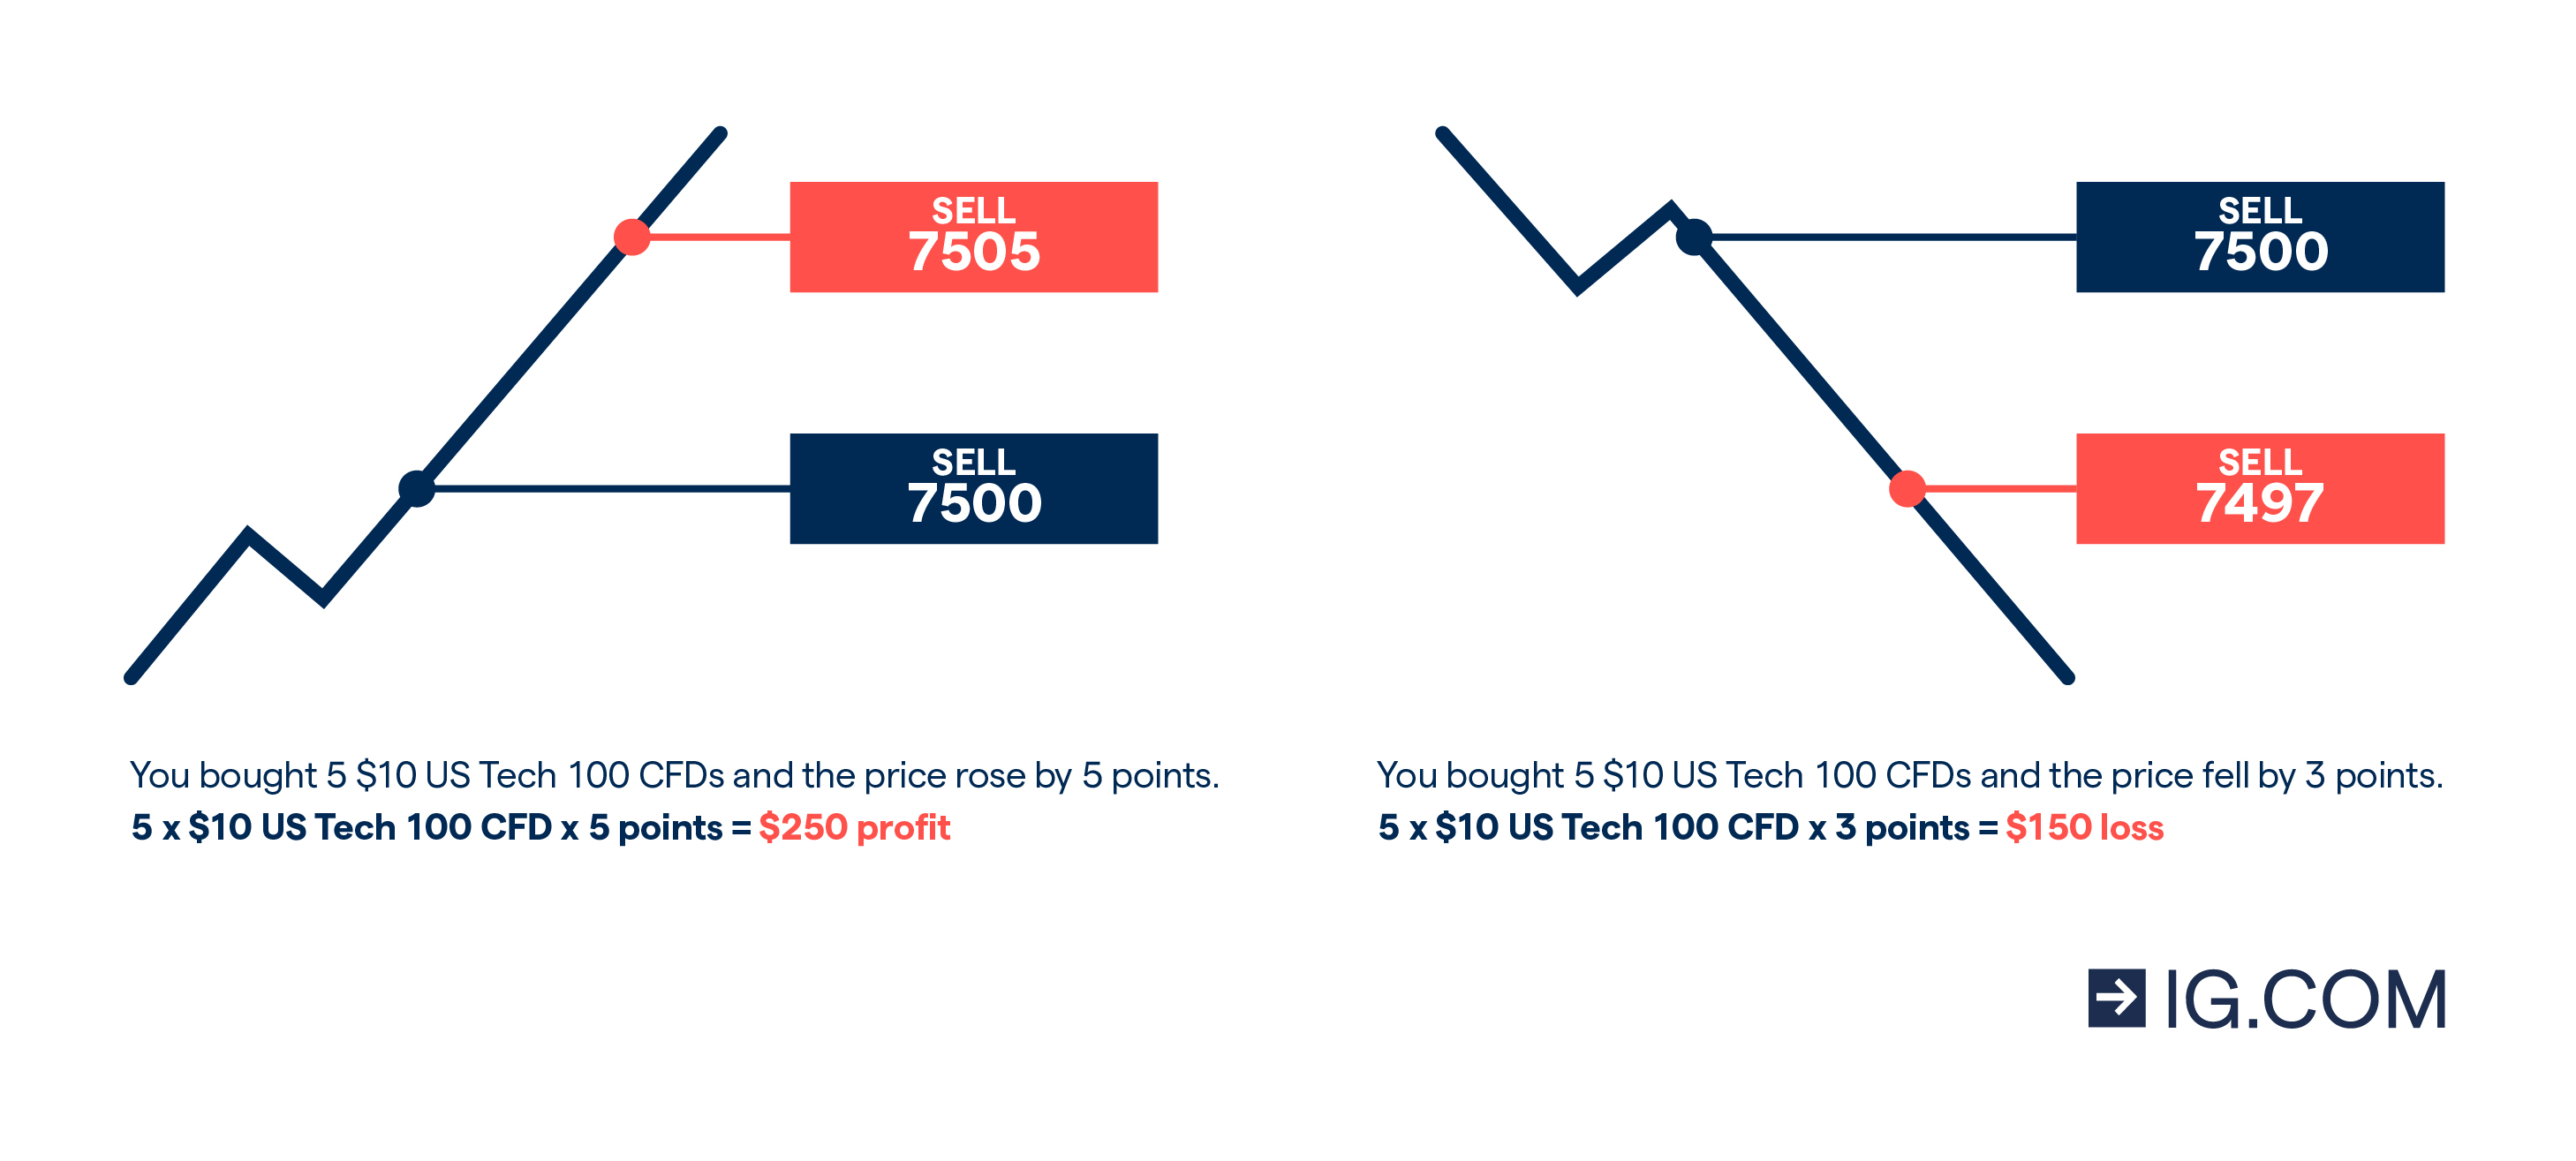 A graphic showing both profit and loss examples when taking different positions on the US Tech 100 Index.